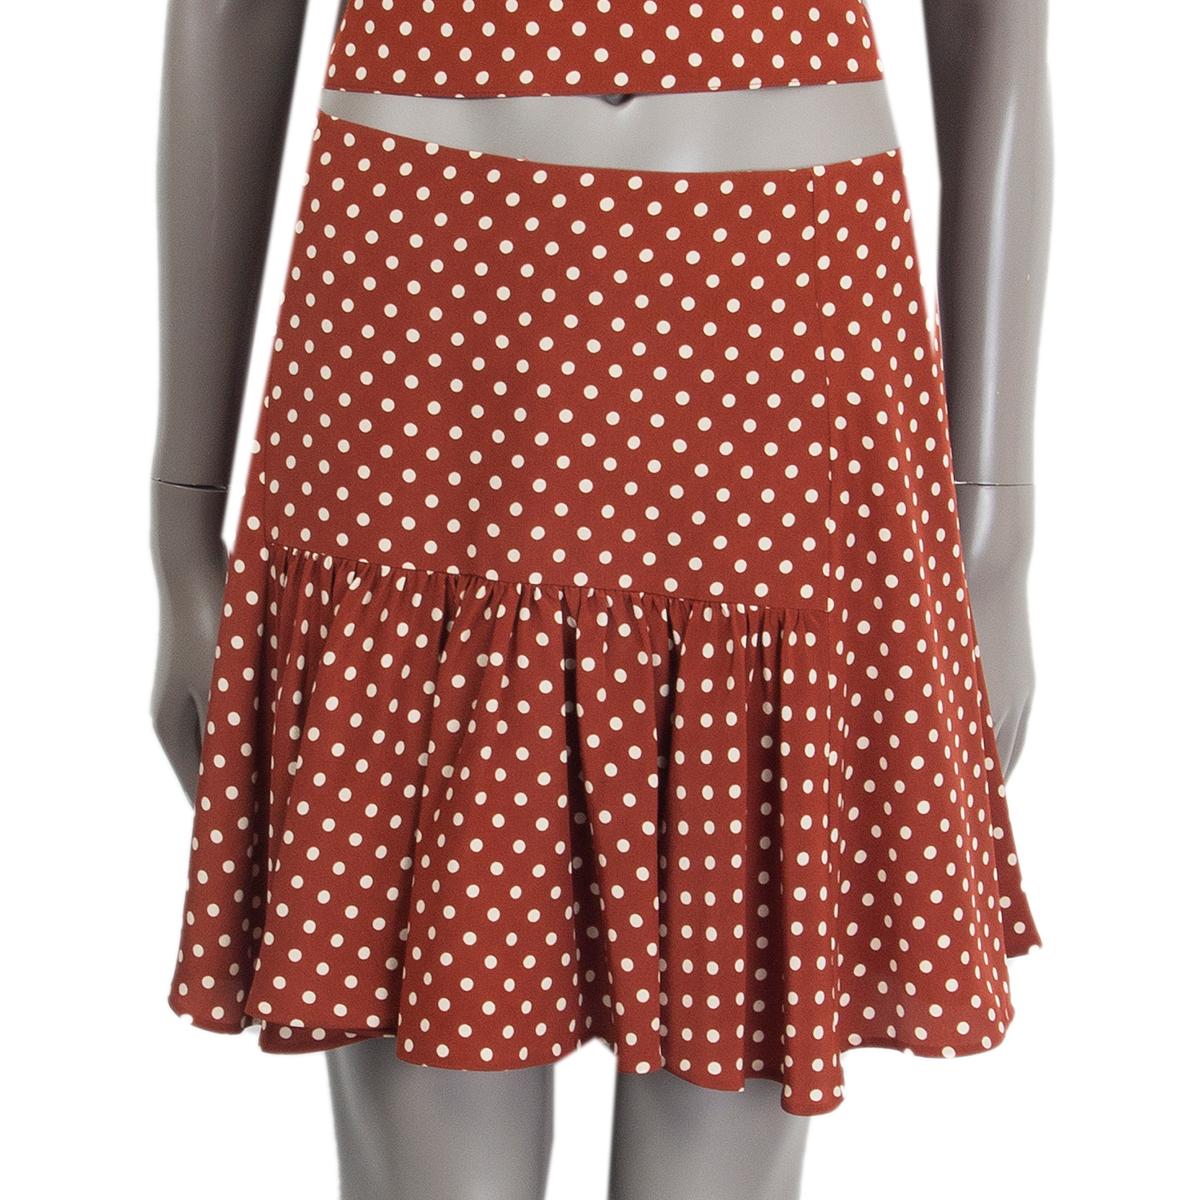 brown skirt with white polka dots